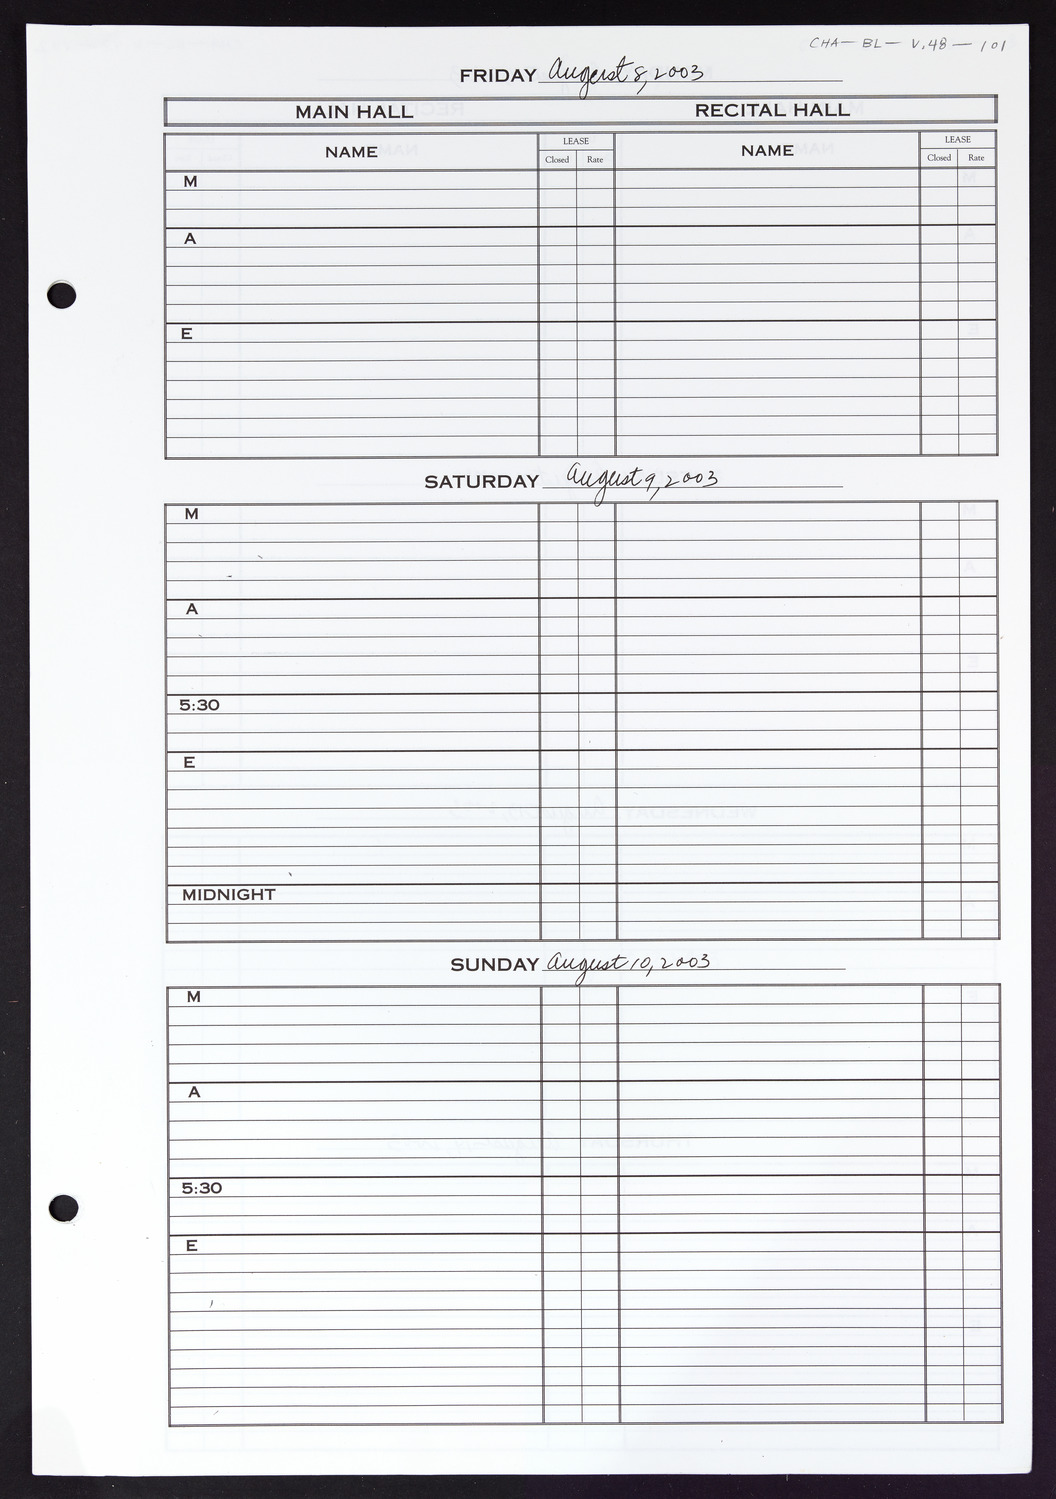 Carnegie Hall Booking Ledger, volume 48, page 101